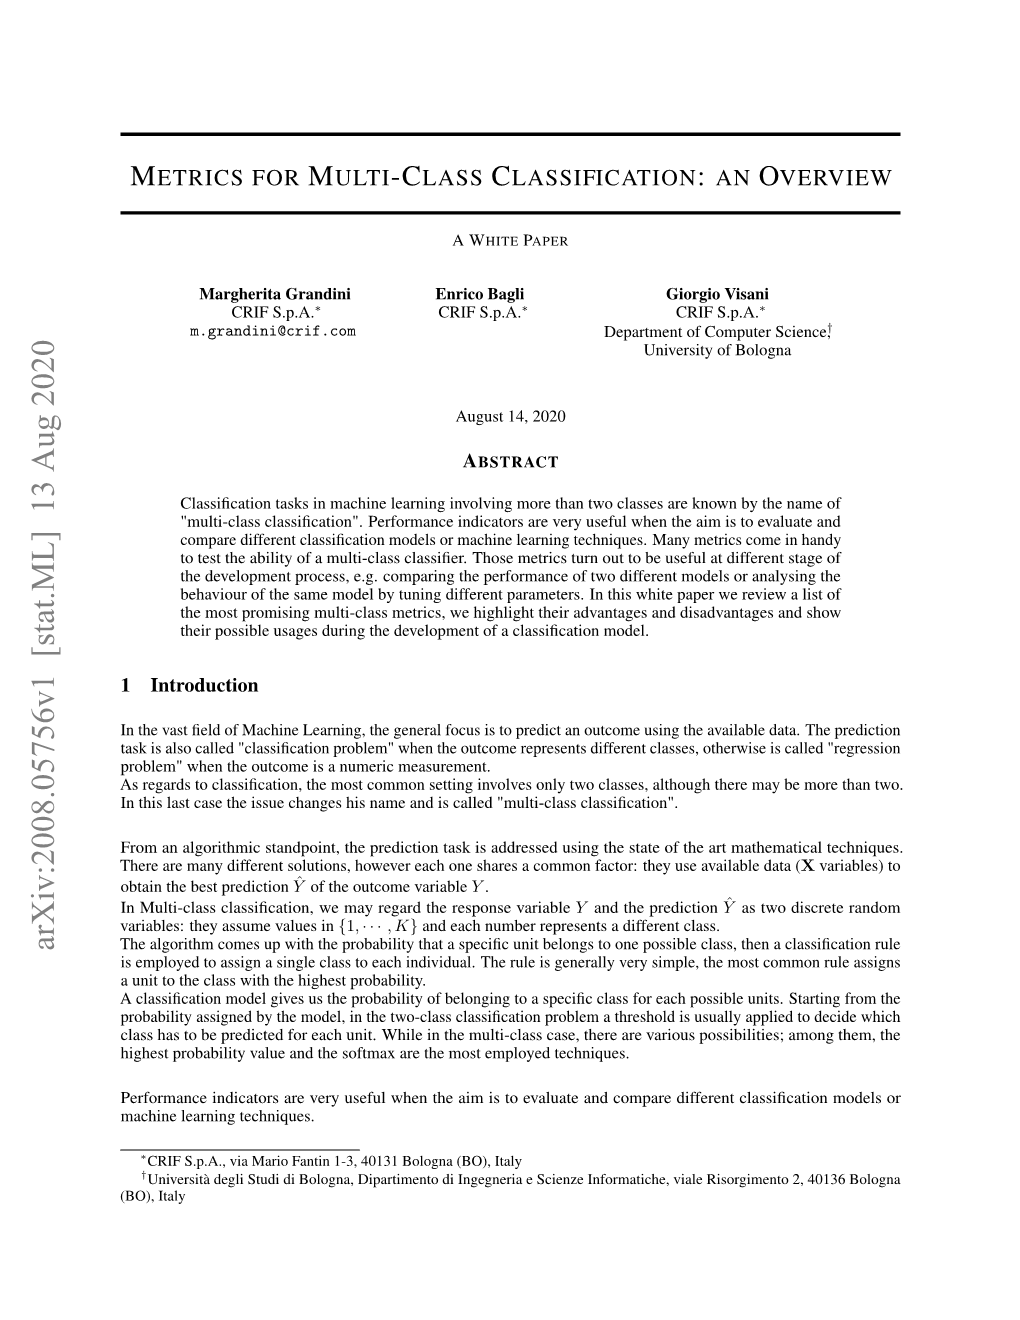 Metrics for Multi-Class Classification: an Overview